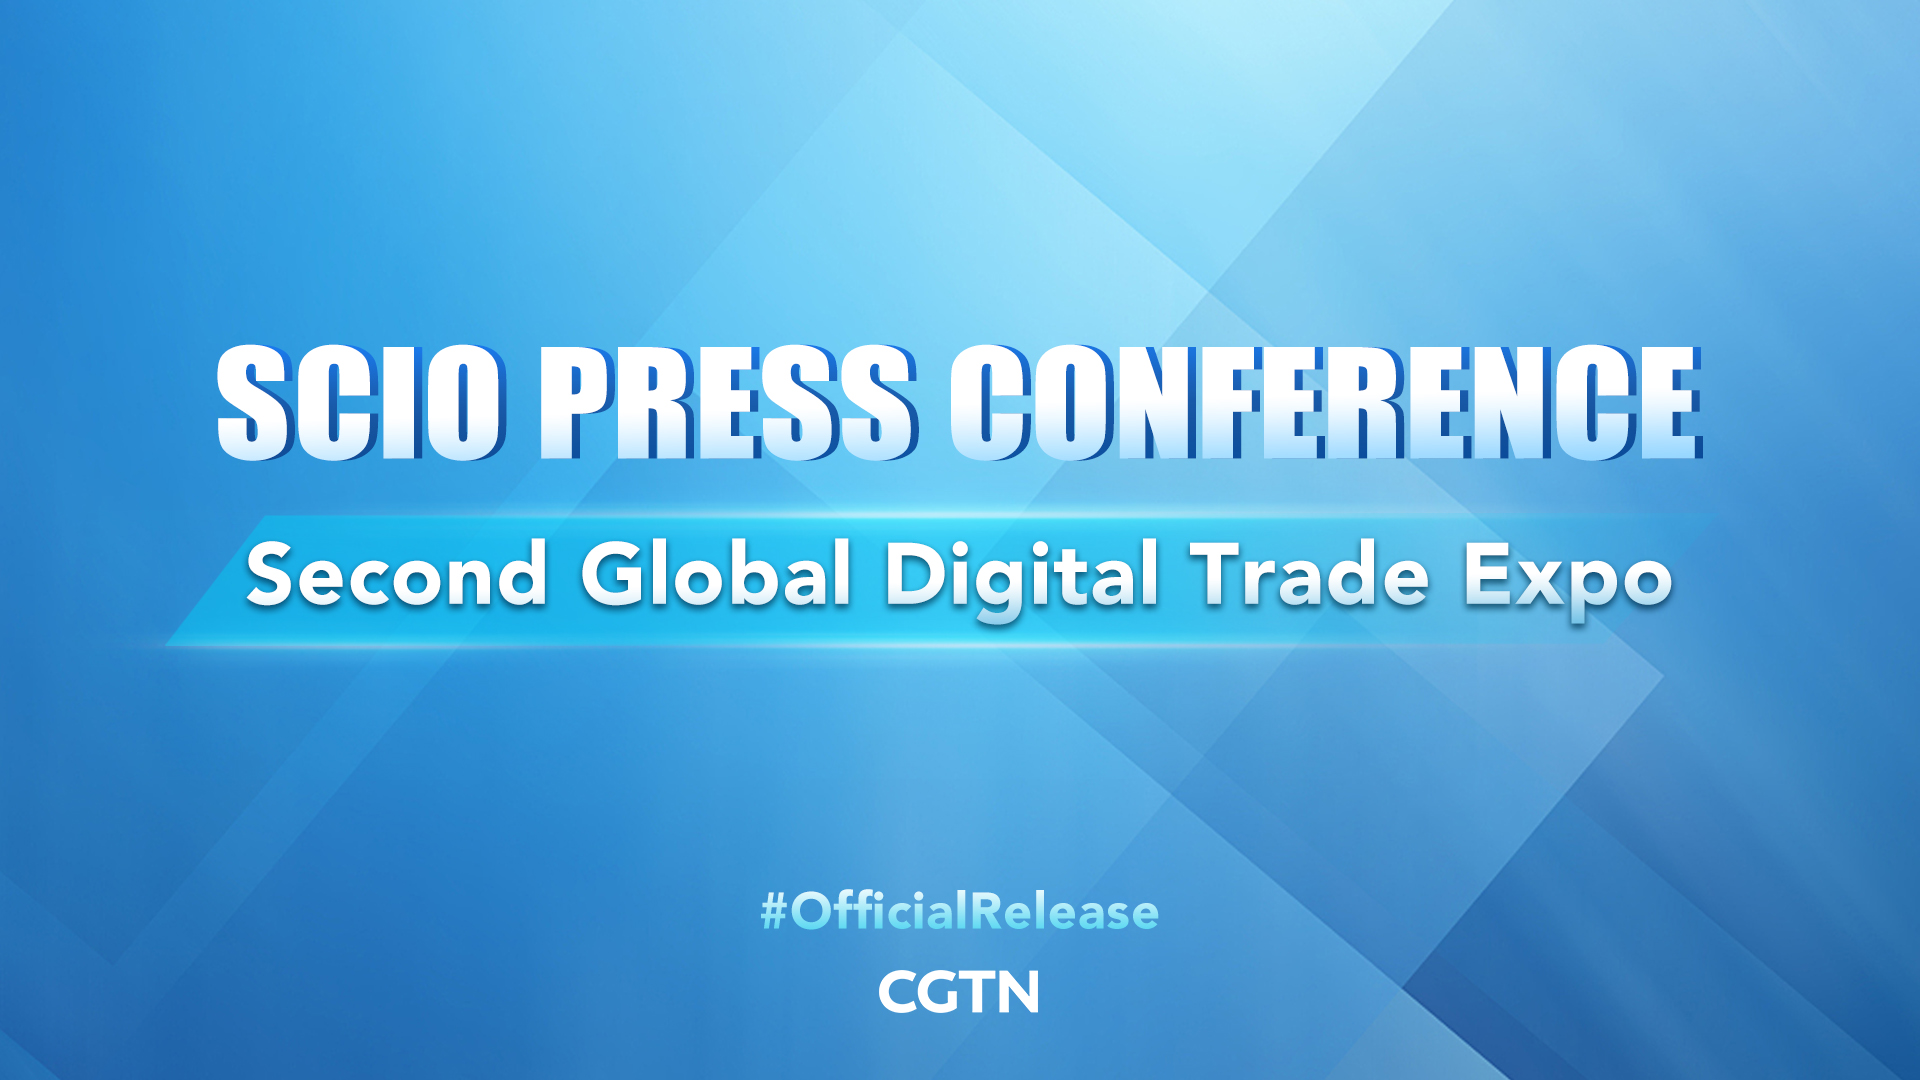 Live: Press conference on the second Global Digital Trade Expo